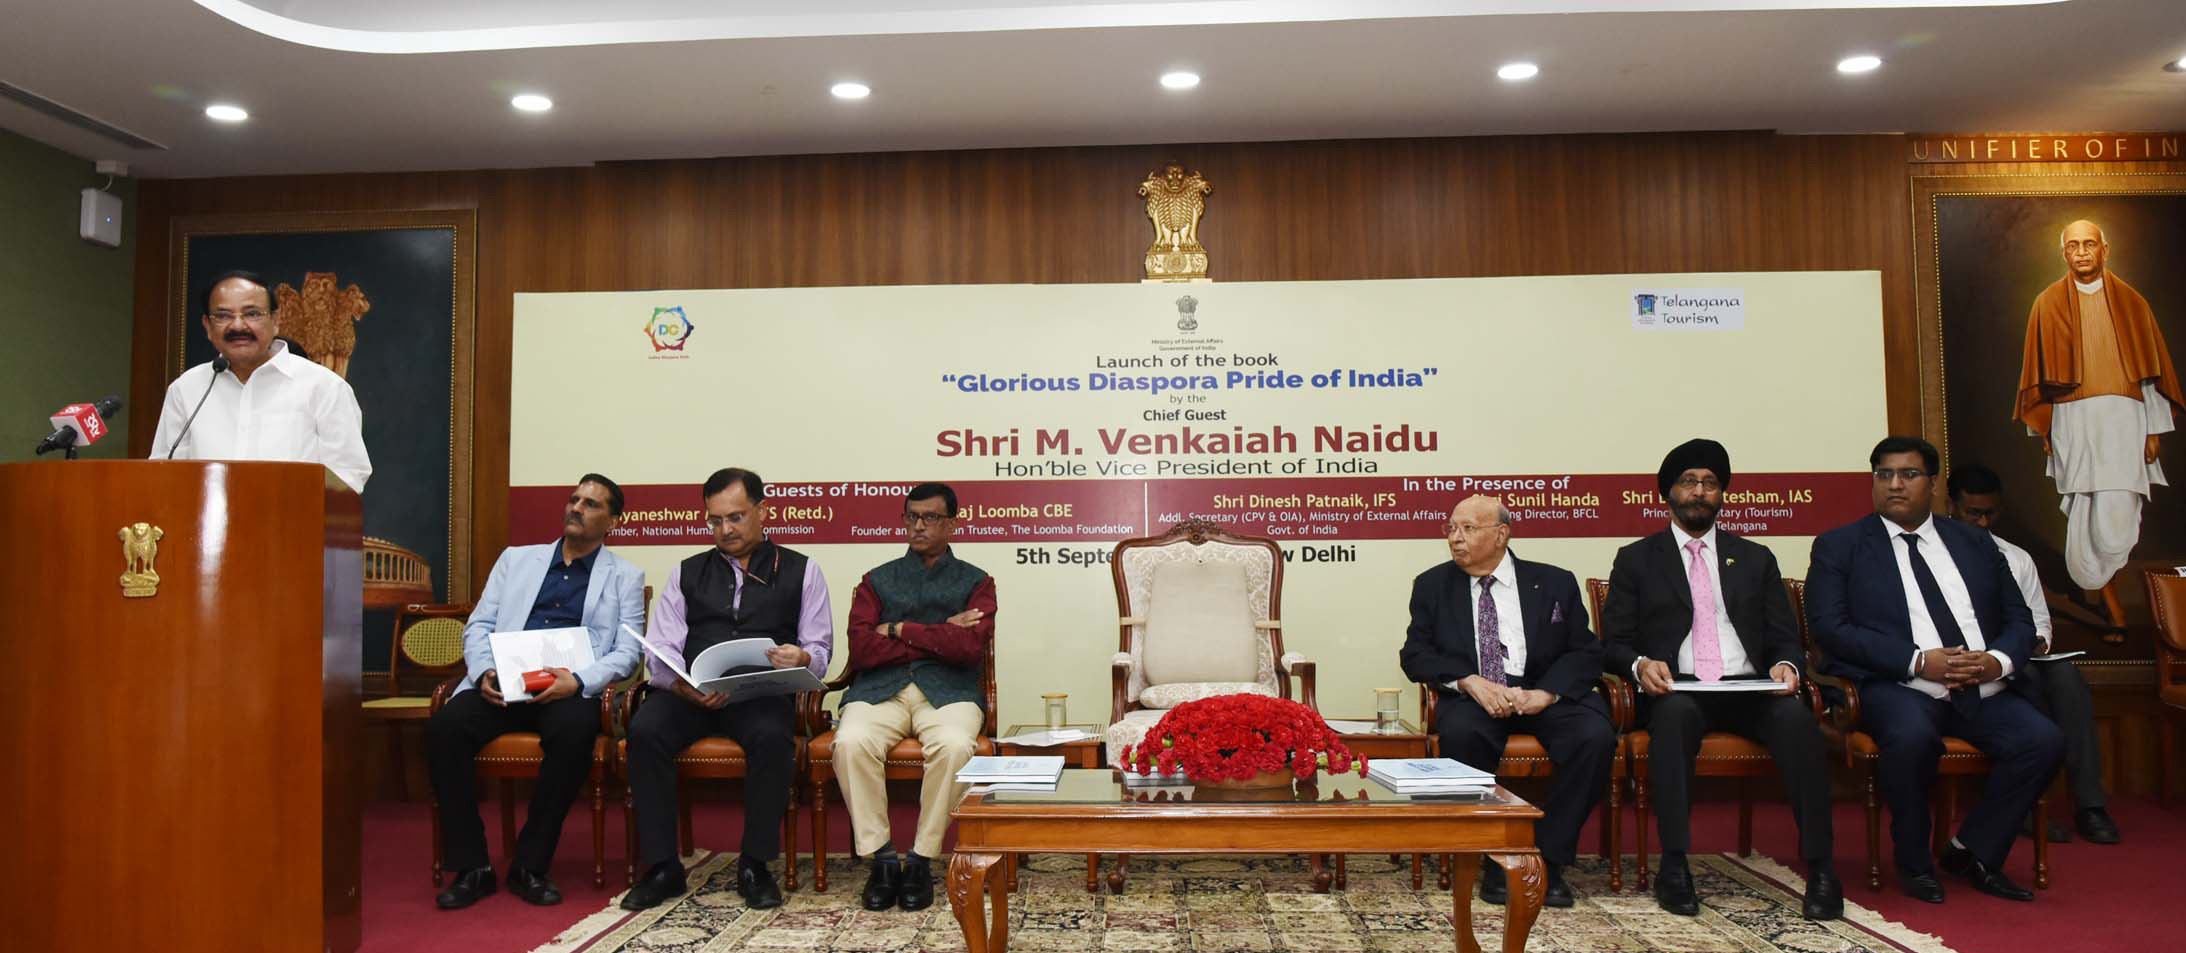 The Vice President,  M. Venkaiah Naidu addressing the gathering after releasing the Coffee Table Book titled 'Glorious Diaspora - Pride of India', containing brief profiles of recipients of Pravasi Bharatiya Samman Awards from 2003 to 2019, in New Delhi